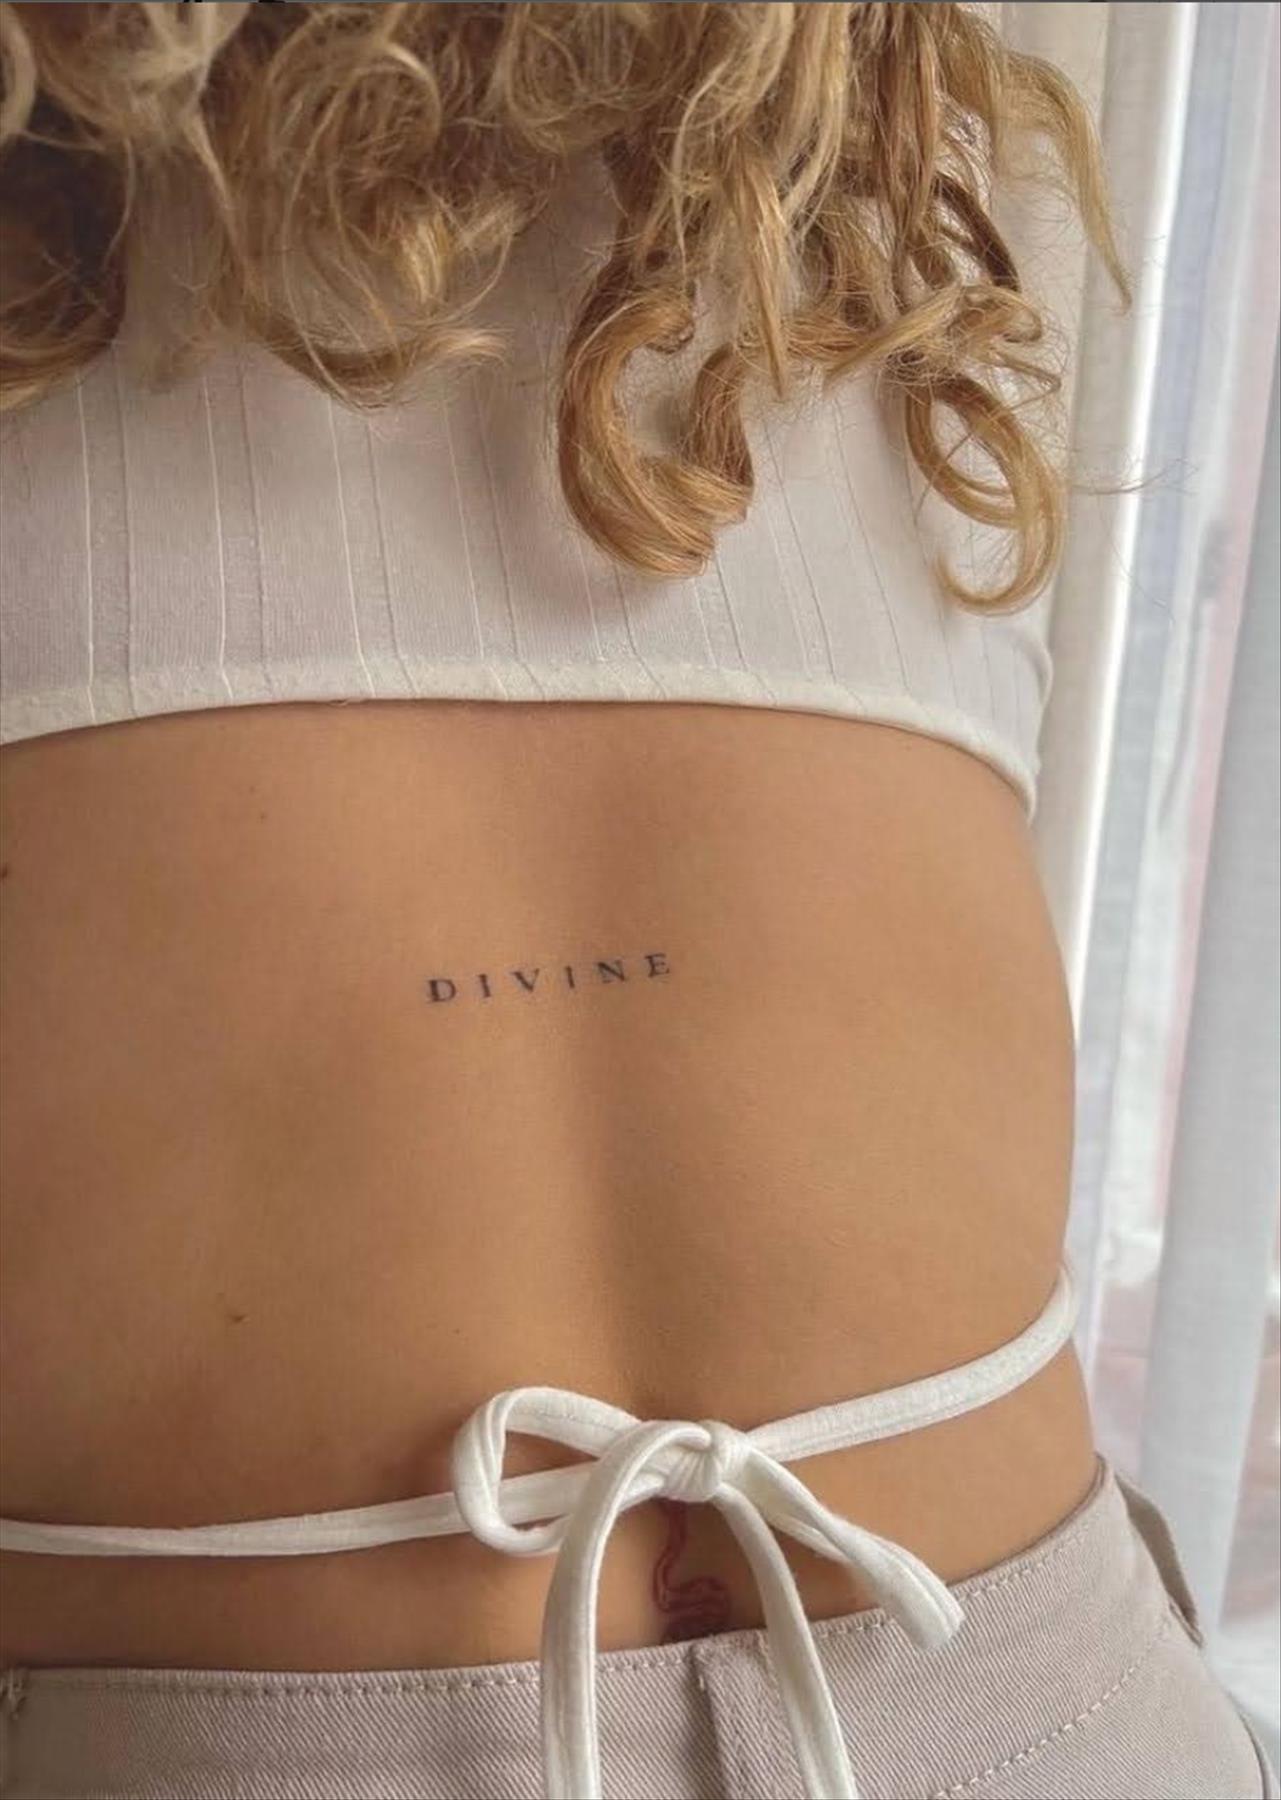 Meaningful and unique letter tattoo designs to be cool